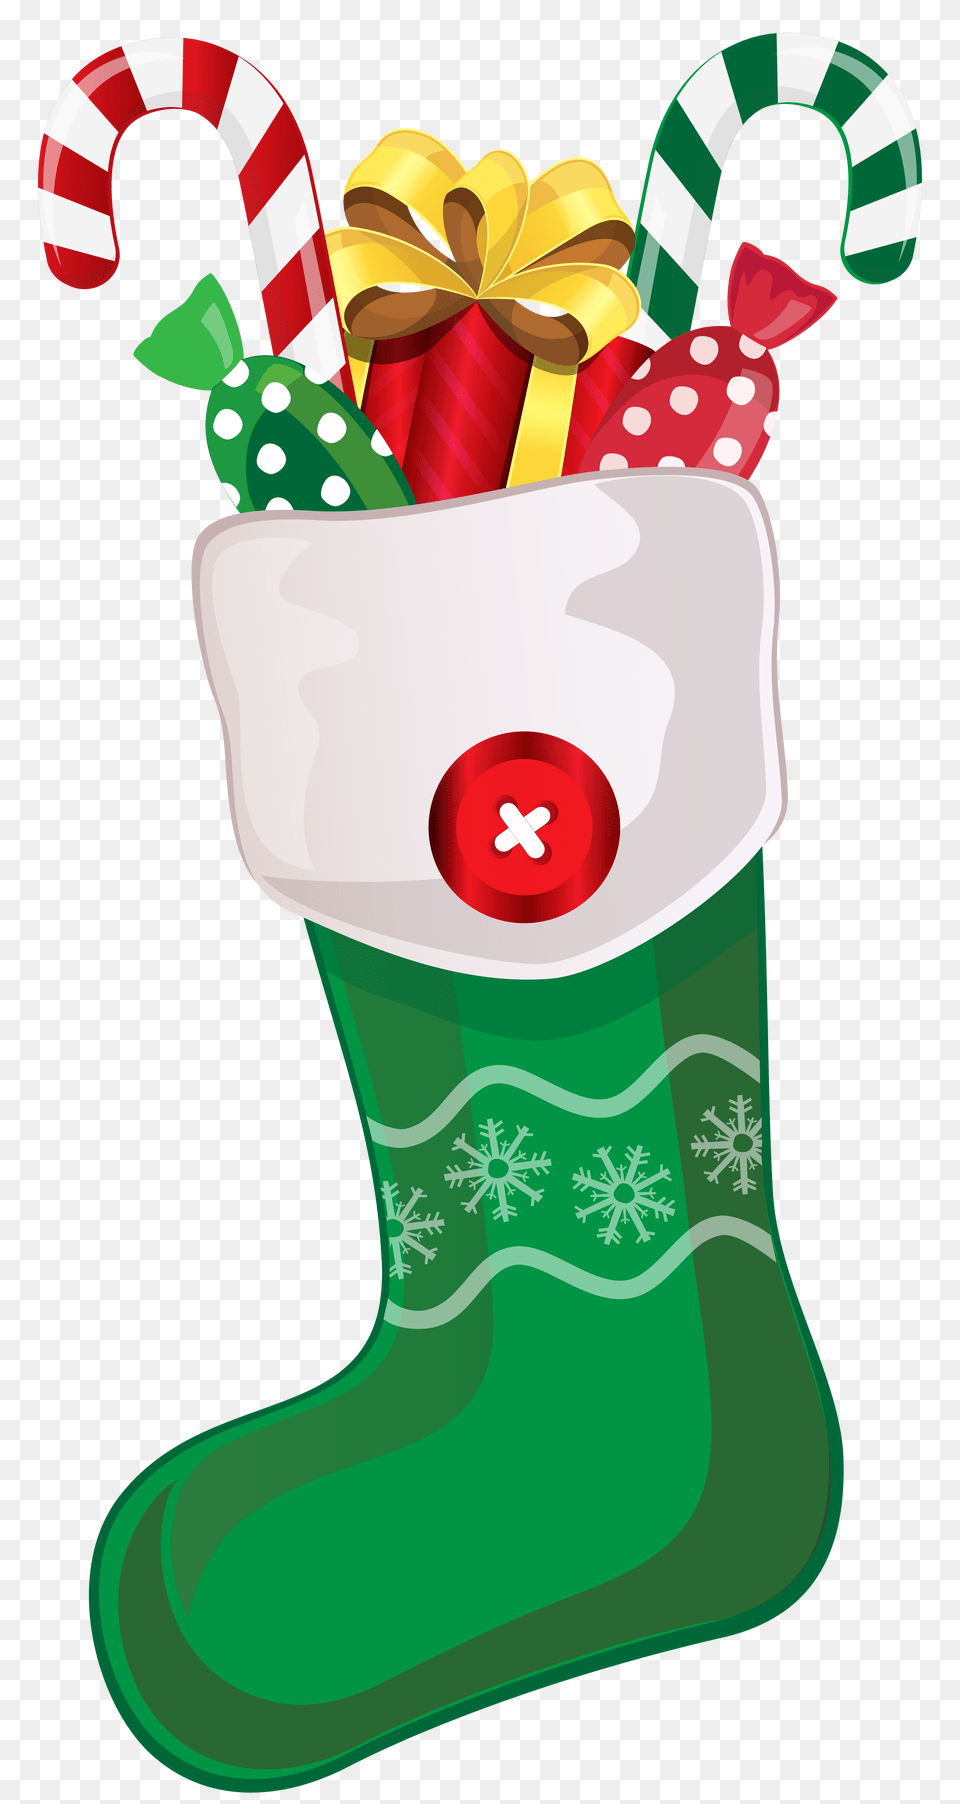 Free Christmas Stocking Transparent Download Clip Art Clip Art Christmas Socks, Gift, Hosiery, Festival, Clothing Png